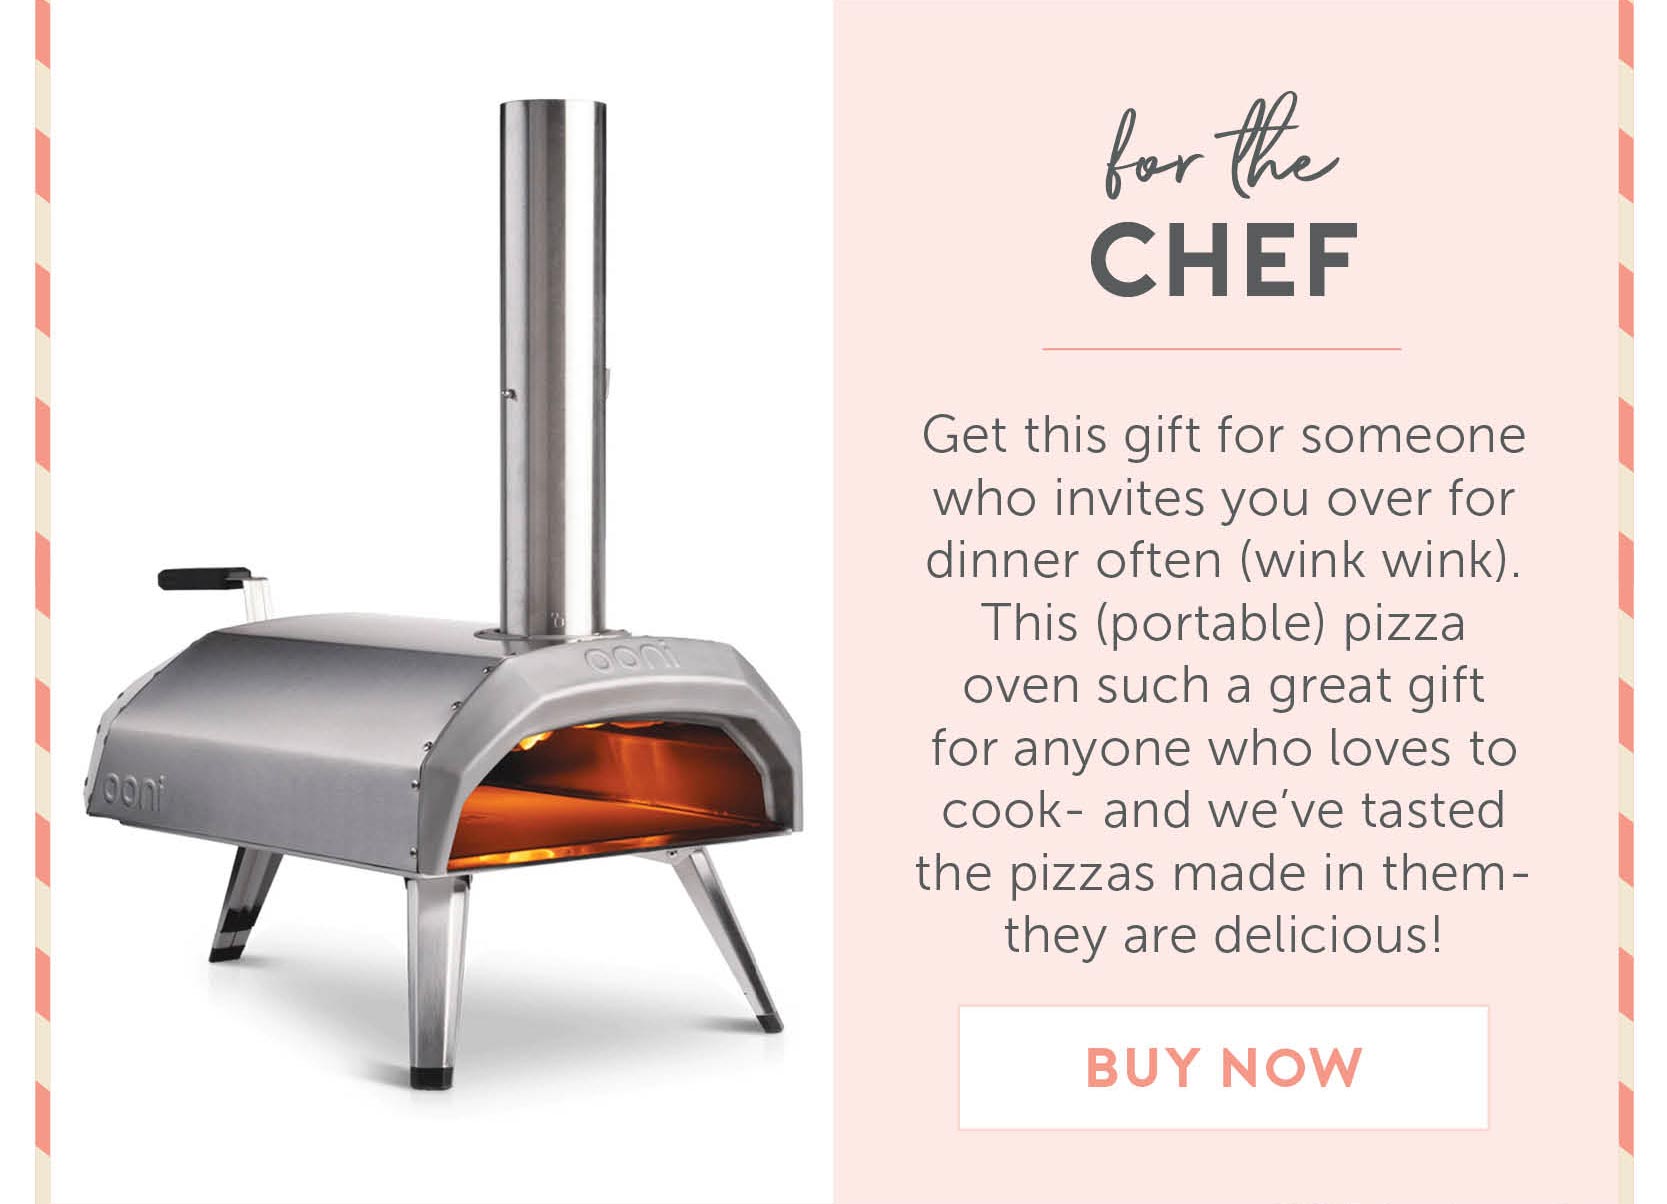 For the chef - Get this gift for someone who invites you over for dinner often (wink wink). This (portable) pizza oven such a great gift for anyone who loves to cook- and we’ve tasted the pizzas made in them- they are delicious!